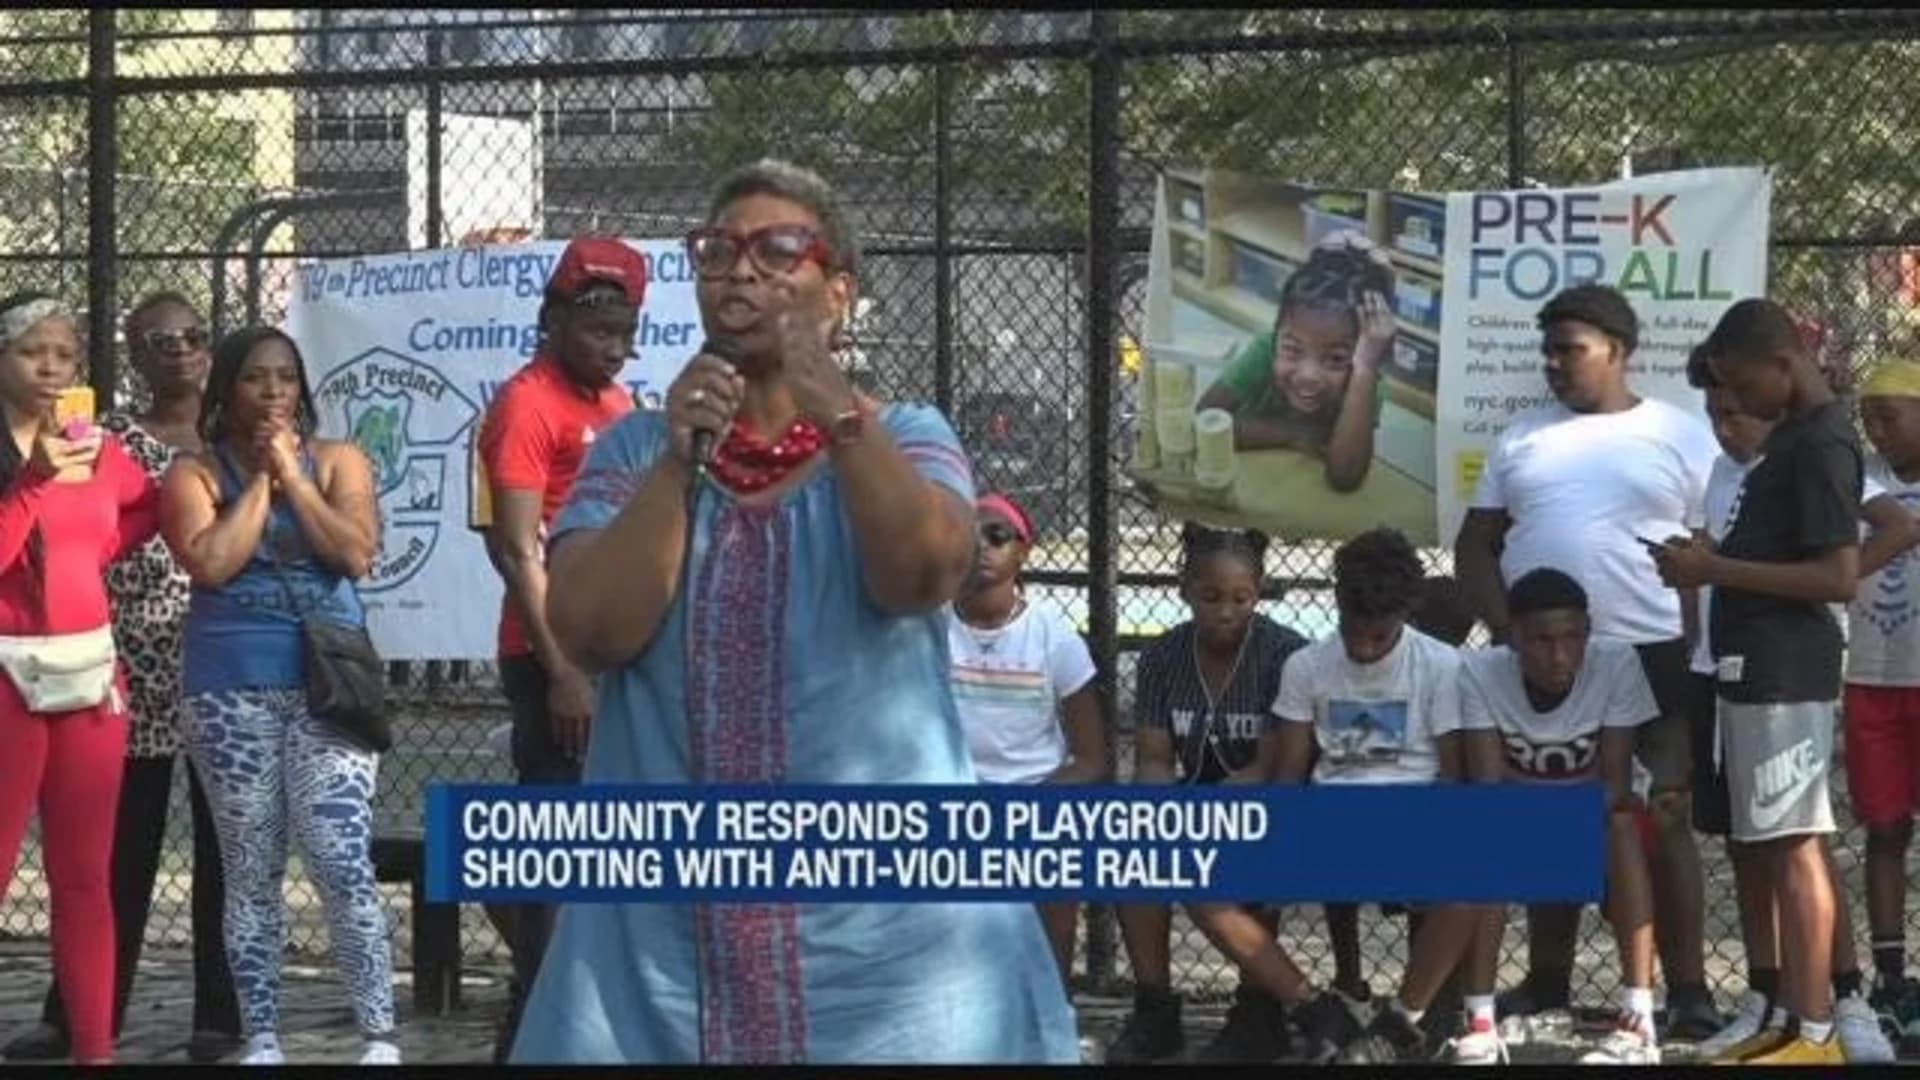 Bed-Stuy community responds to playground shooting with rally